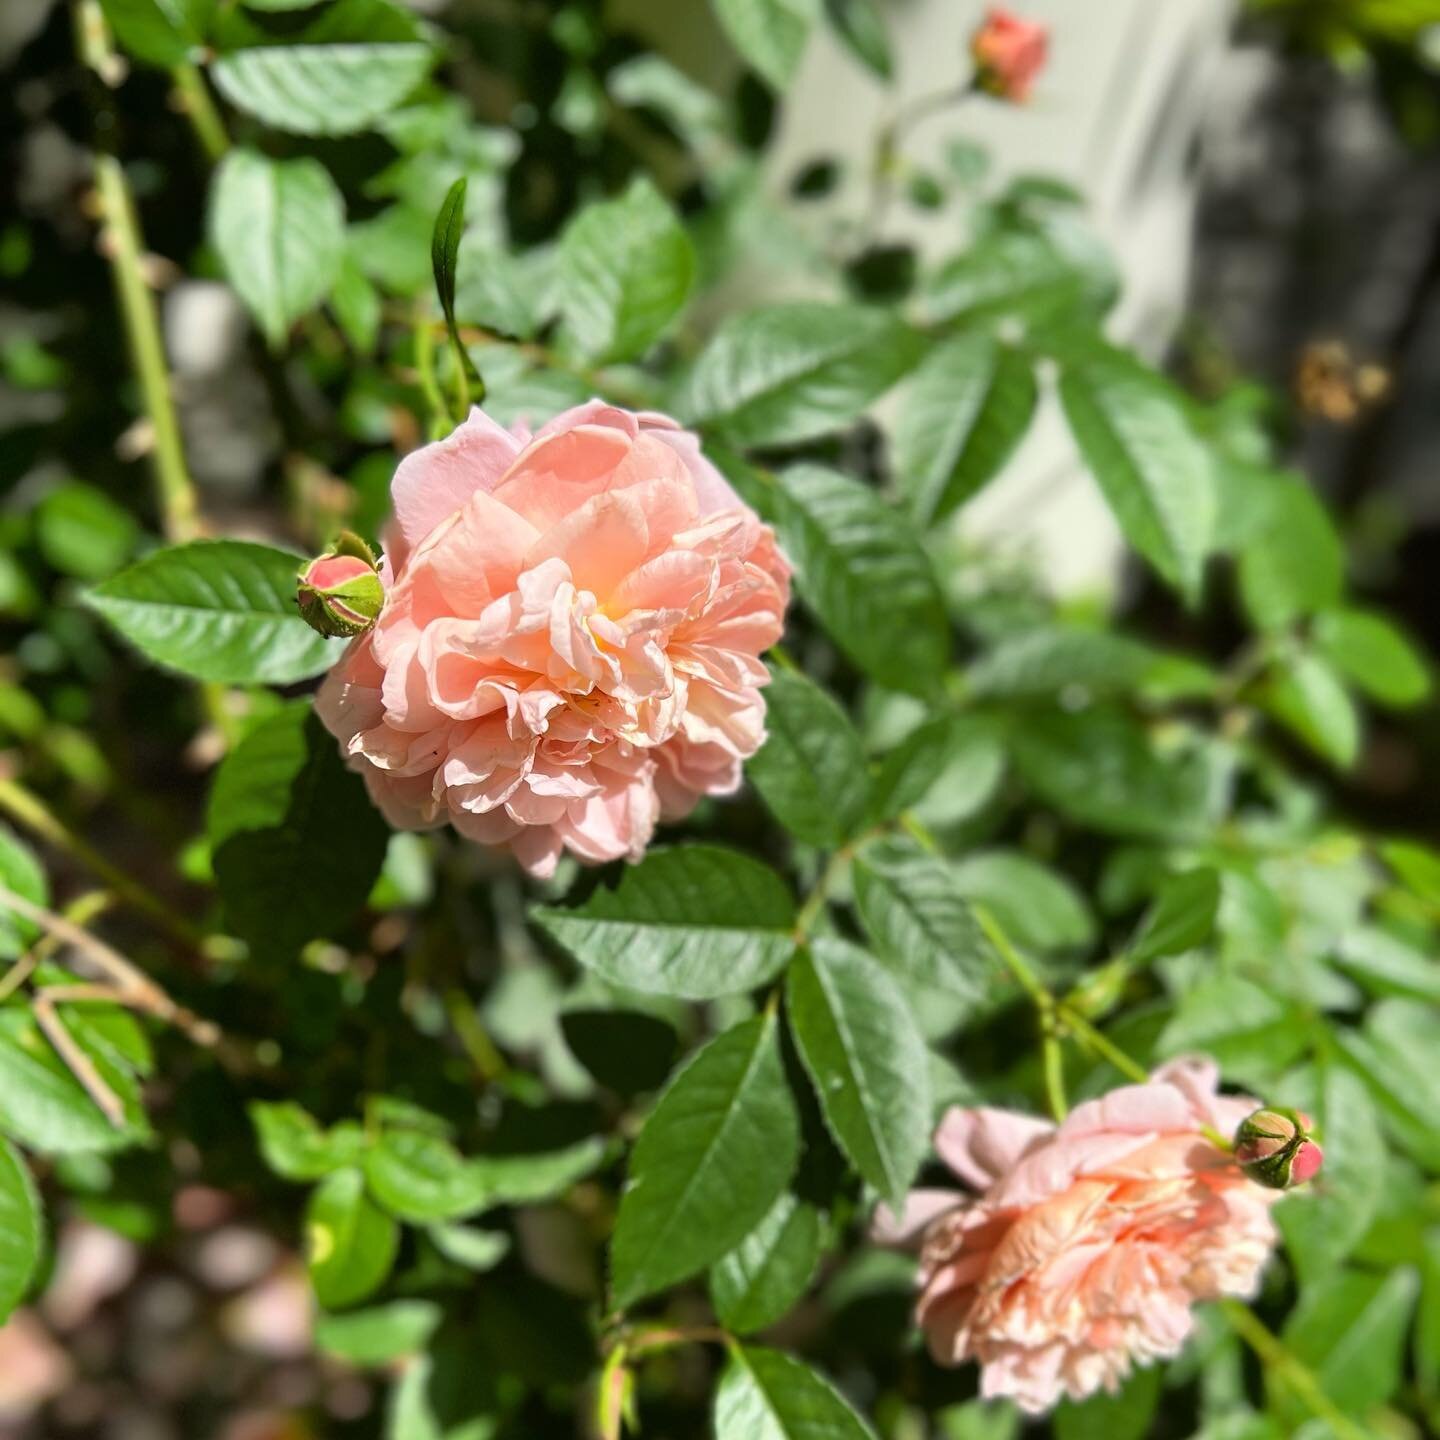 Colette roses climbing up the entrance of my client&rsquo;s home. The fragrance is intoxicating!
.
.
.
#springroses #colette #makeanentrance #cottagehome